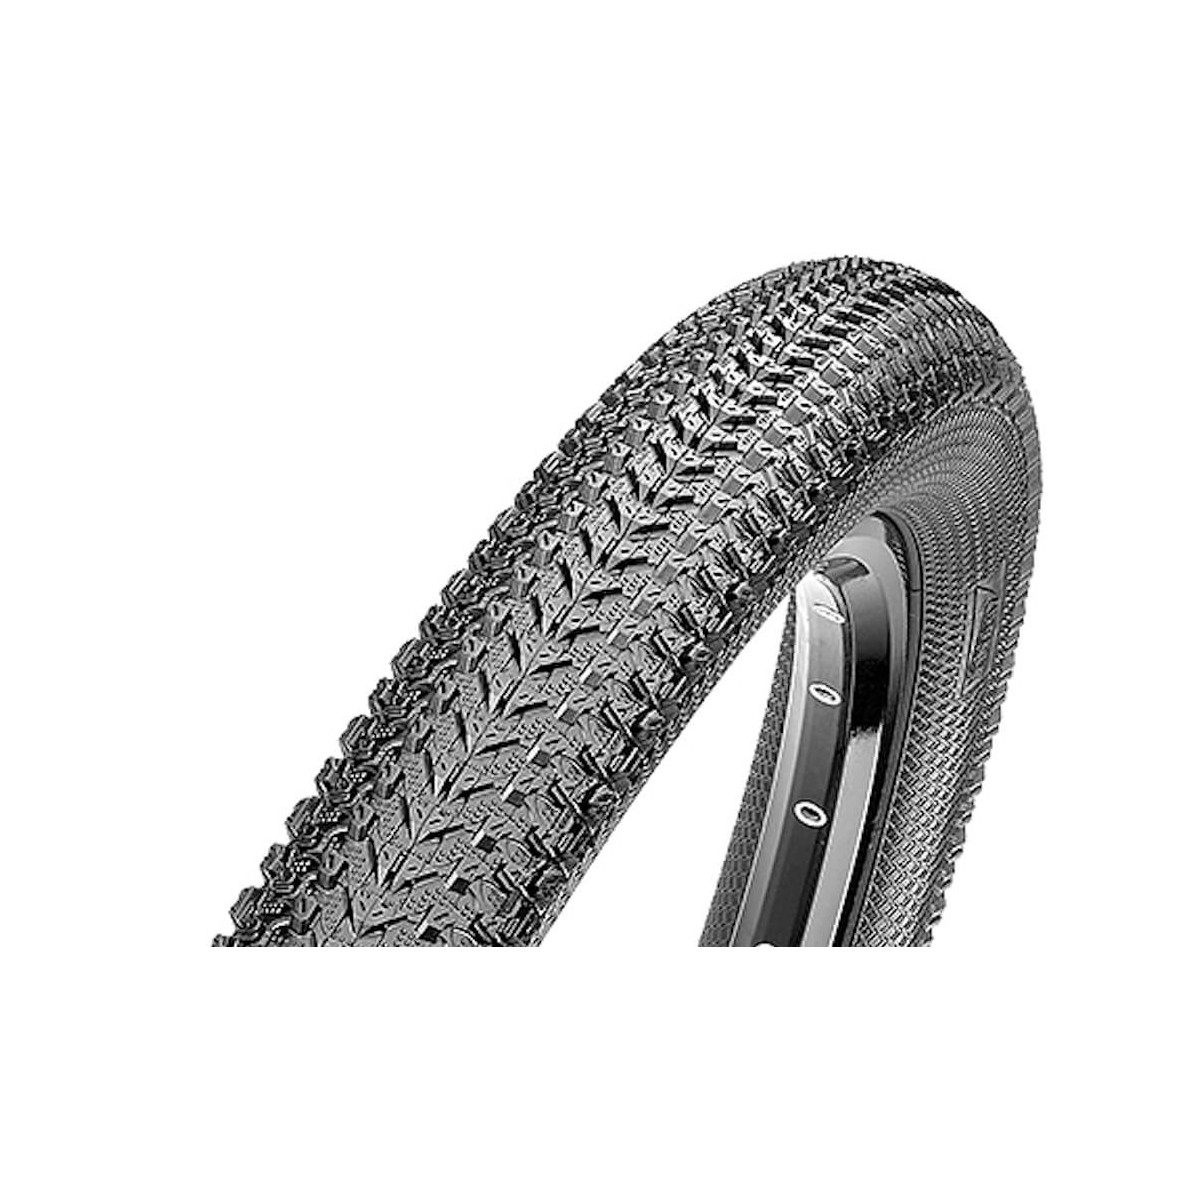 Maxxis Pace 26